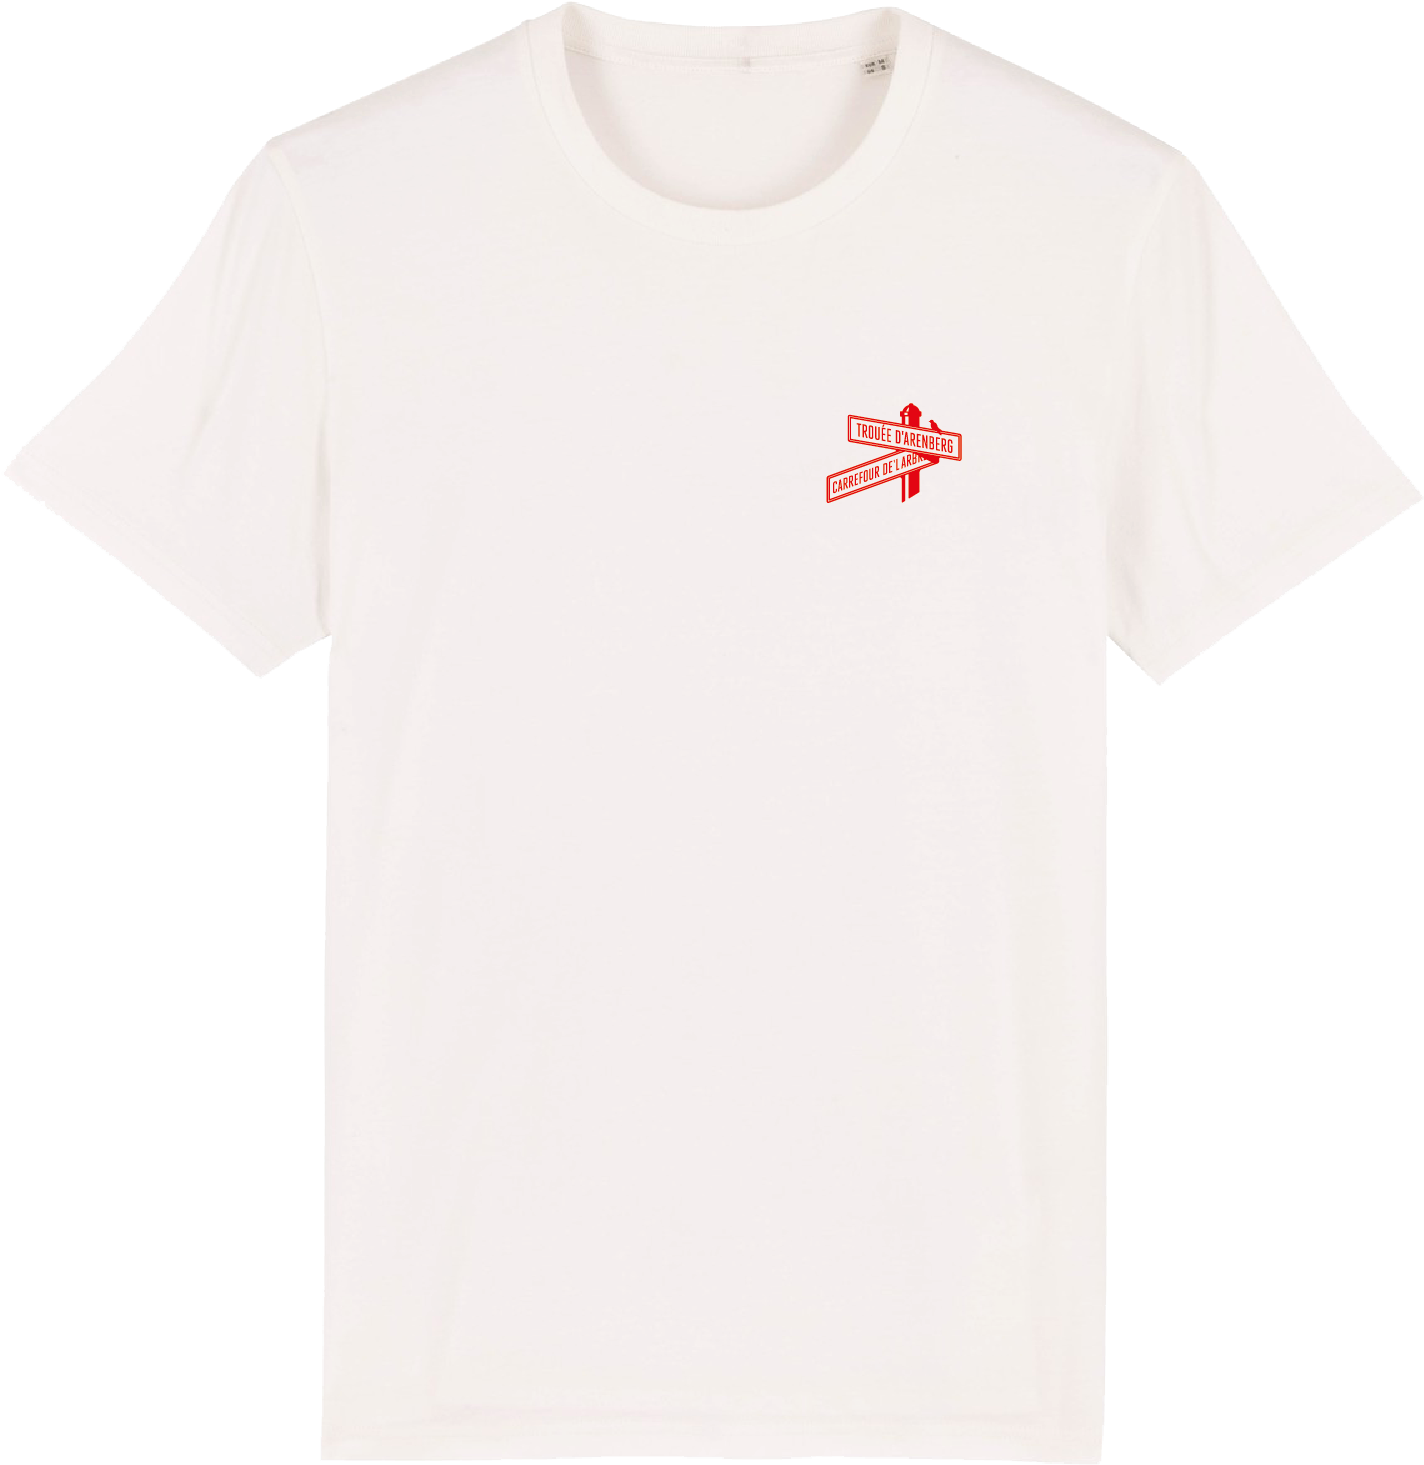 Roubaix Road Sign Unisex Cycling T-shirt - Offwhite/Red)